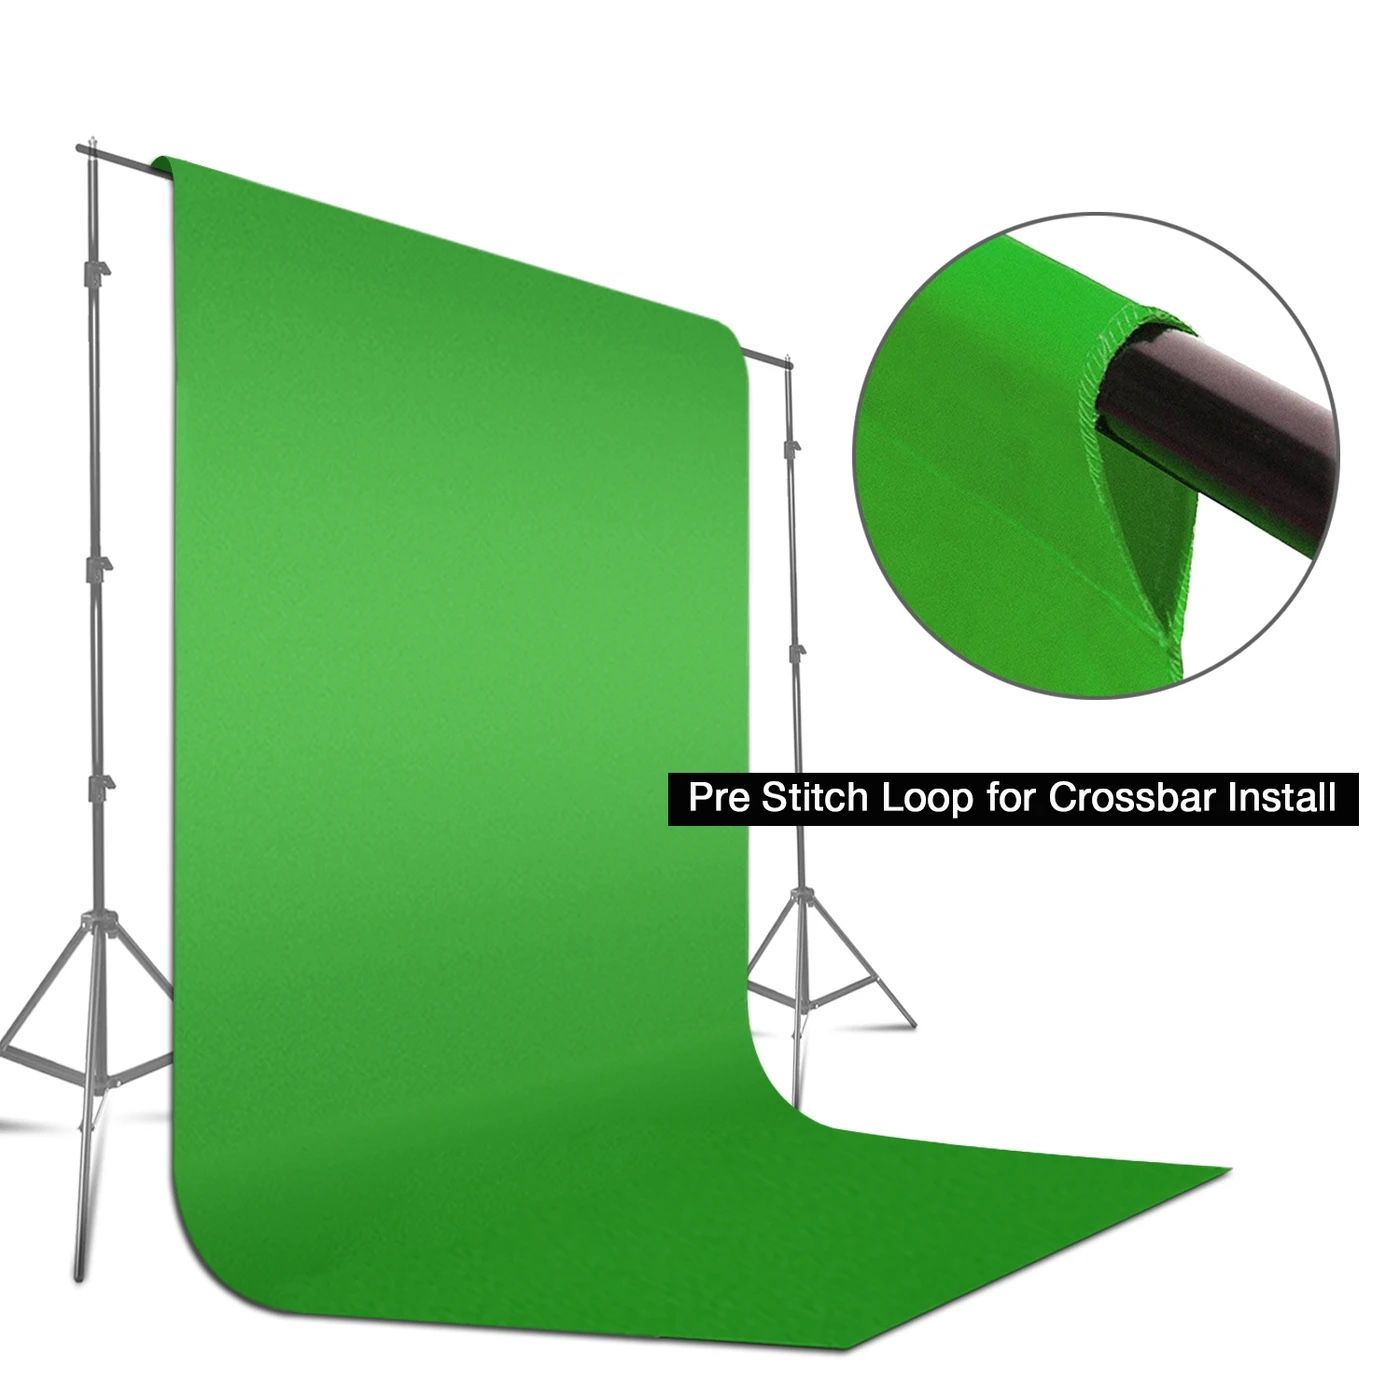 Green Fabricated Chromakey Backdrop Background Screen for Photo / Video Studio